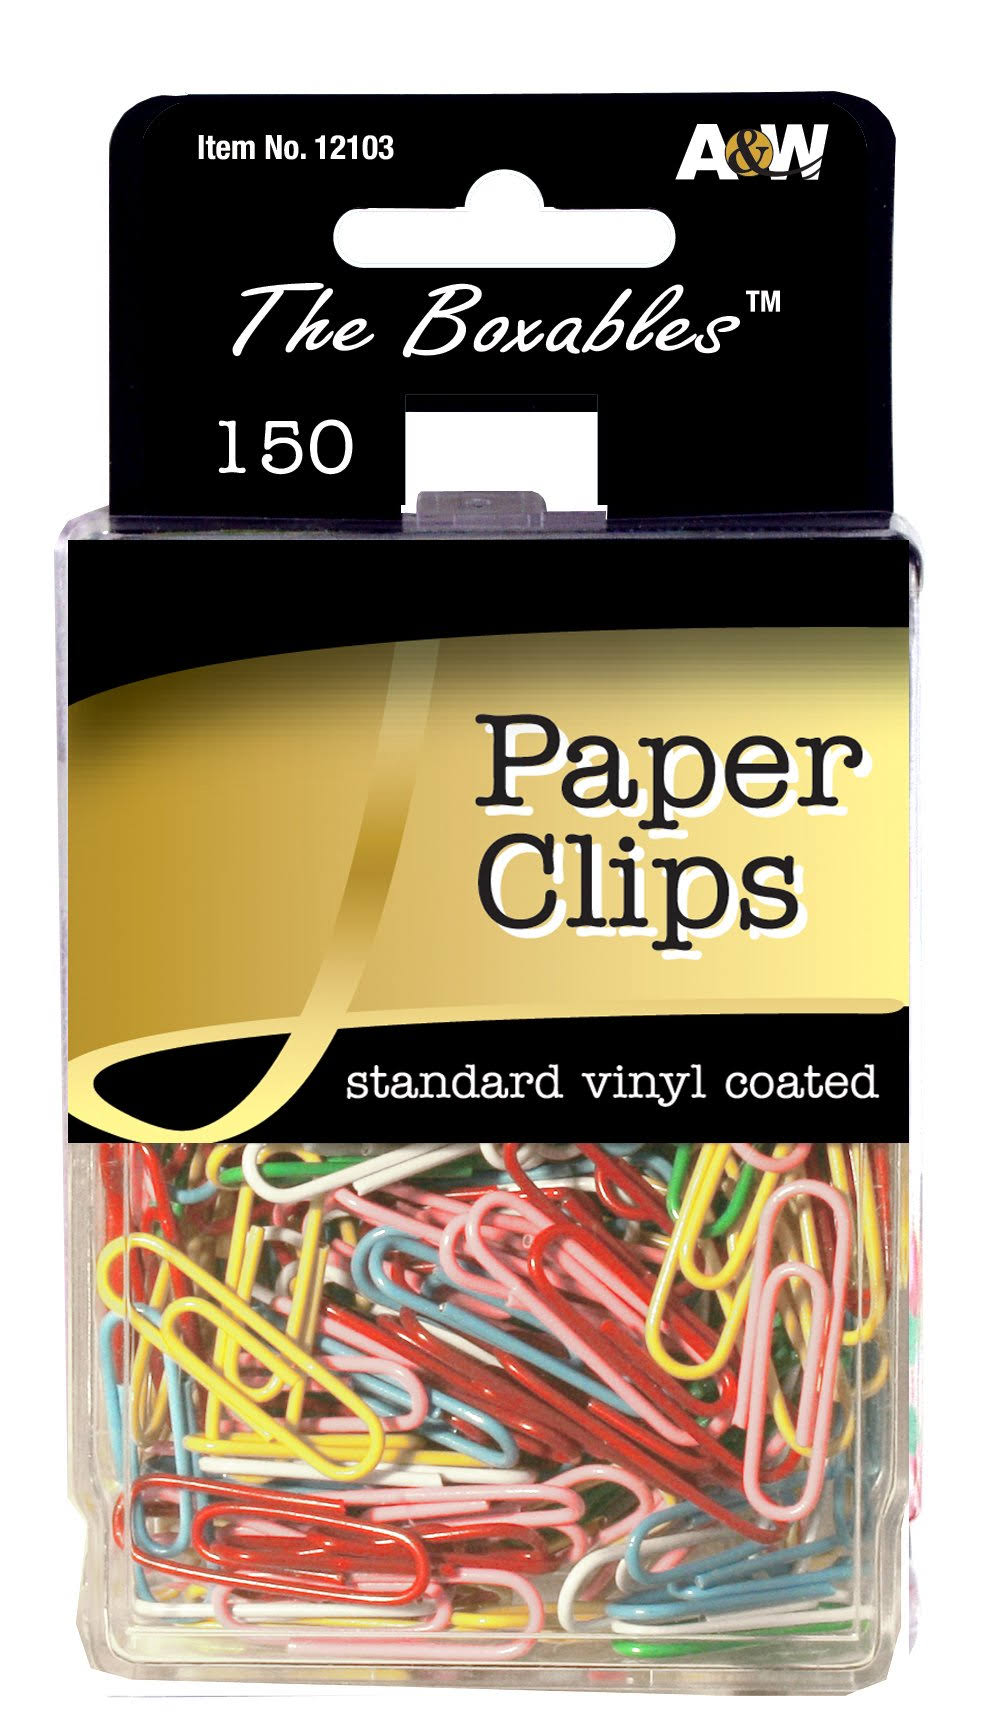 A&W Products Vinyl Coated Paper Clips - Assorted Colors